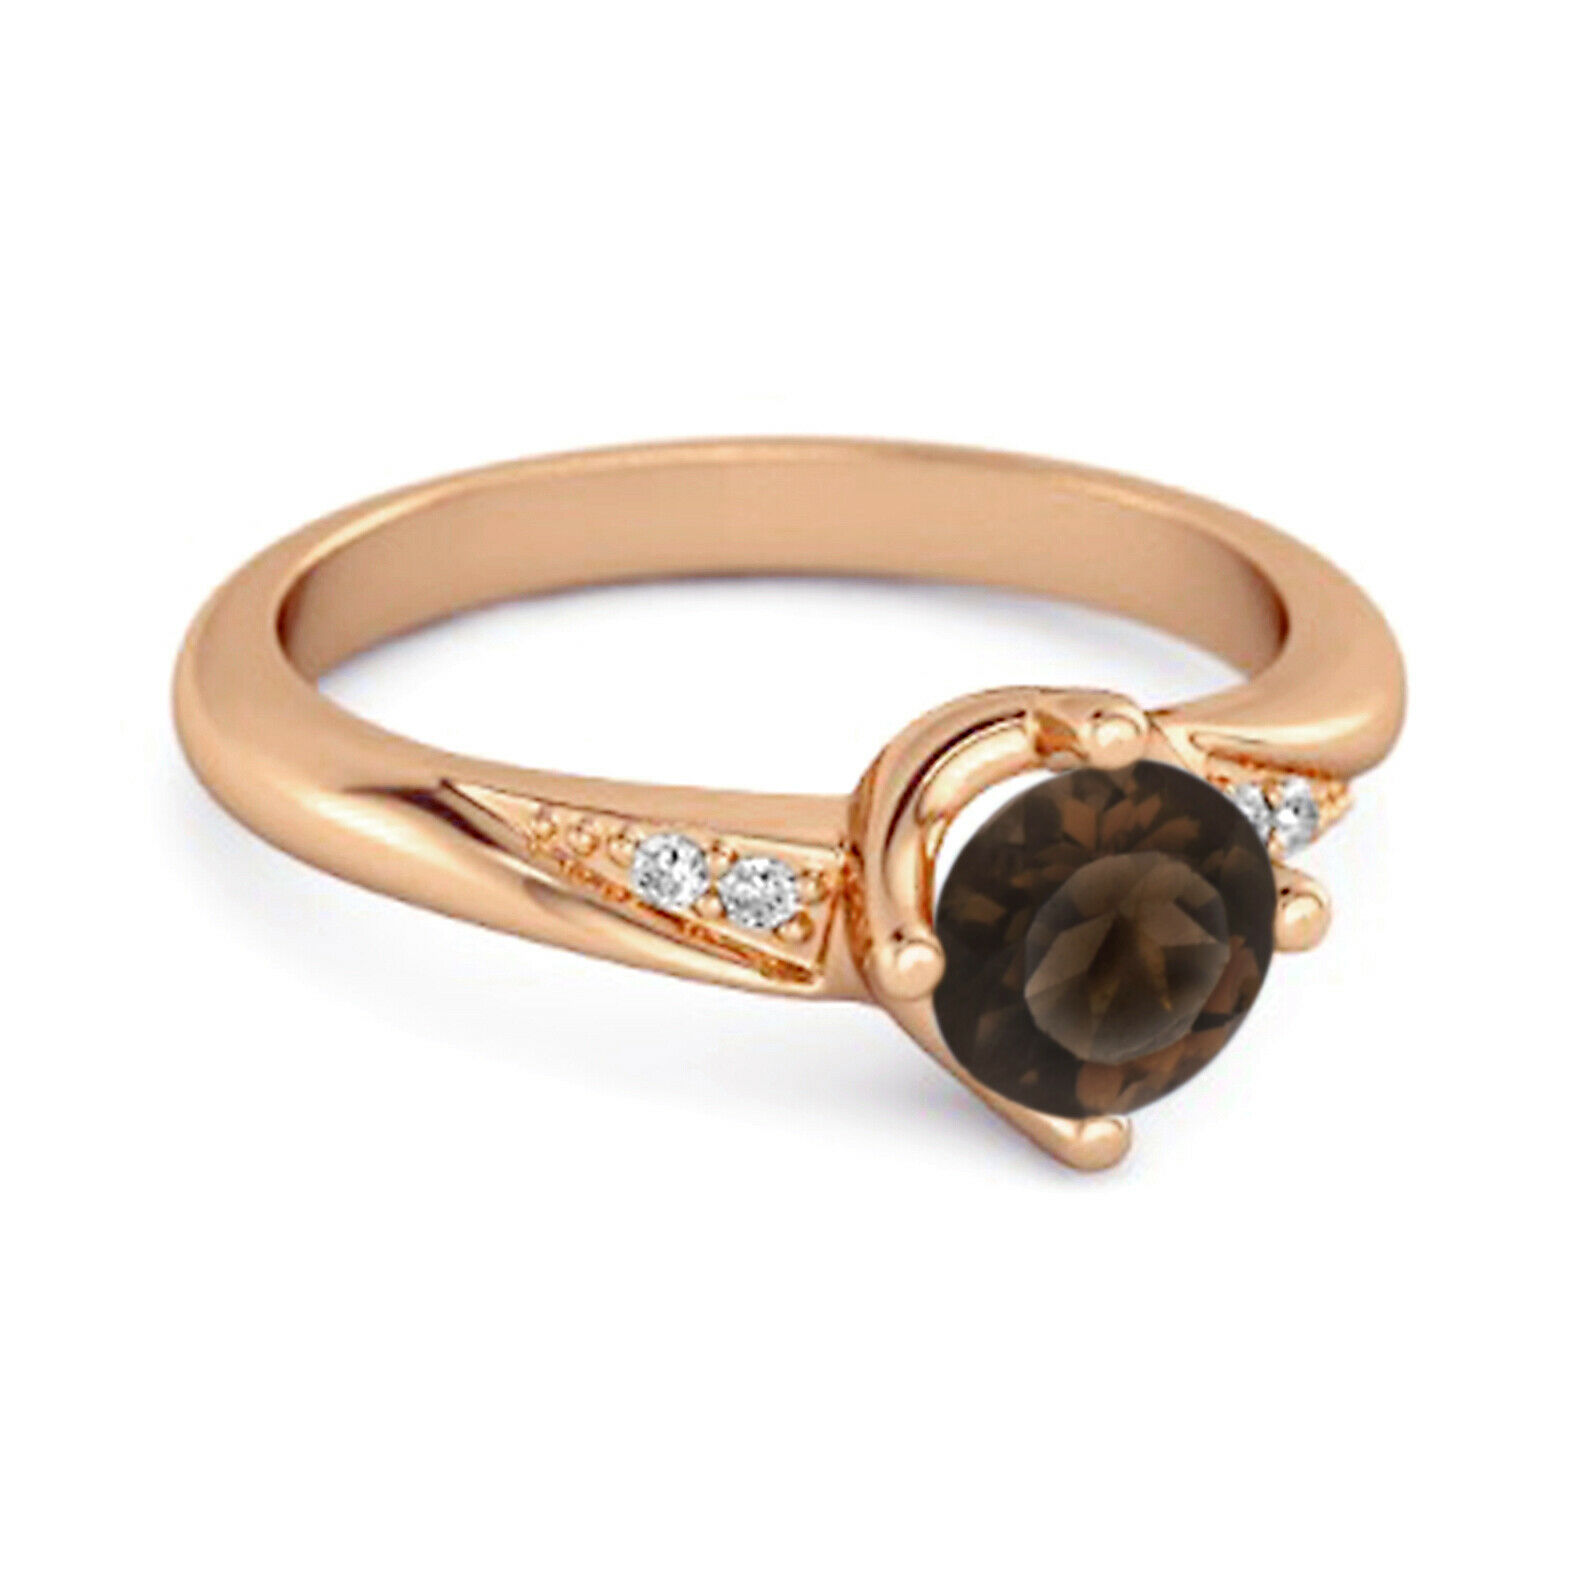 Solitaire 0.25 Ctw Smoky Quartz Gemstone Accents 9K Rose Gold Ring